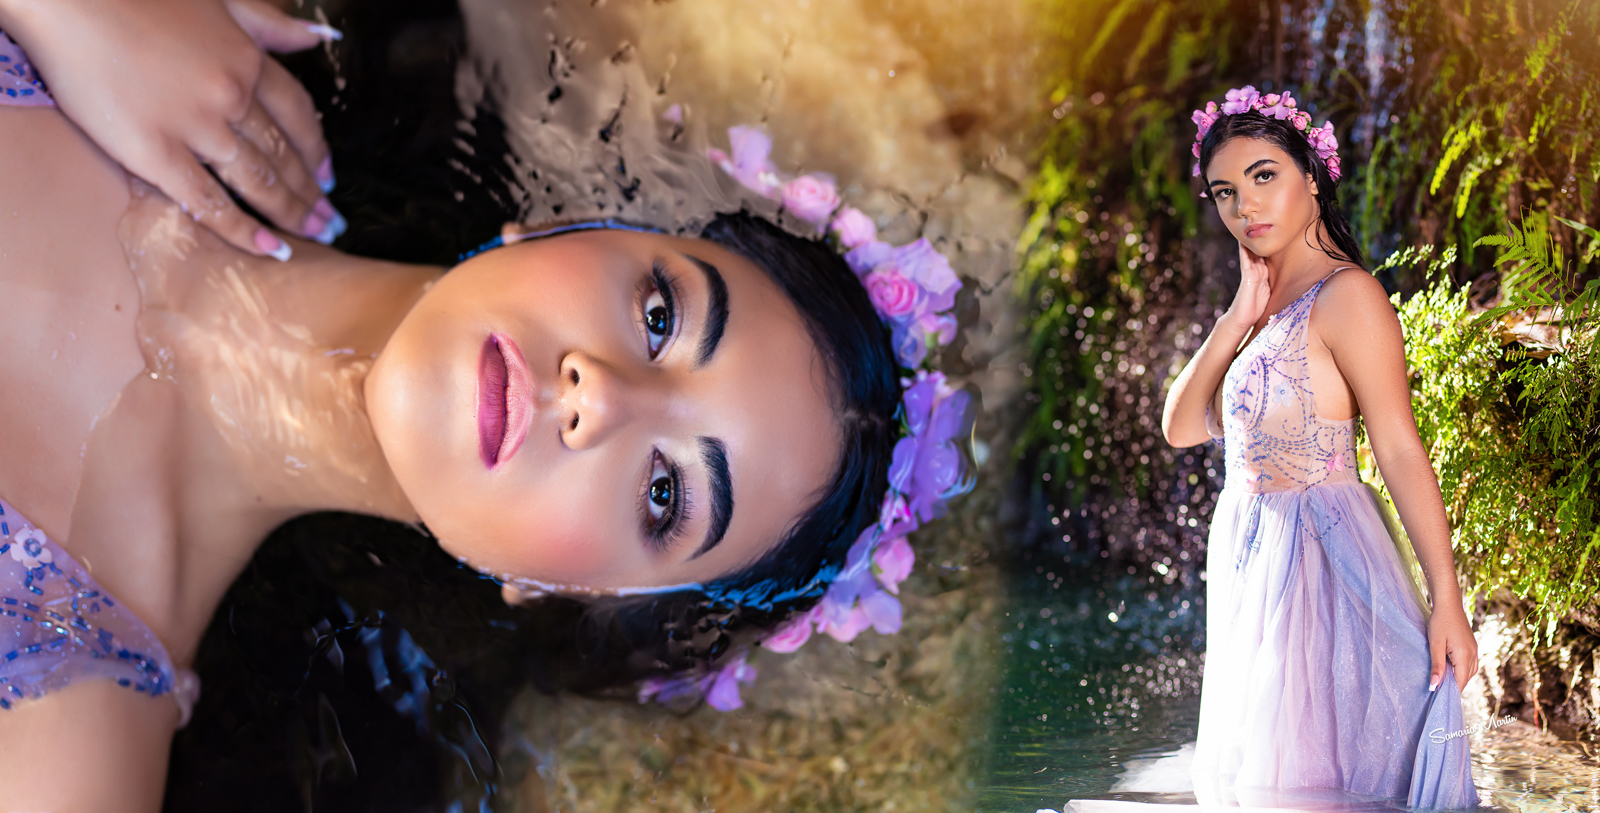 Photoshoot with flowers, photoshoot in a lake, best quinceañera dressed, best Water Dresses, Samaria Martin photography (1)